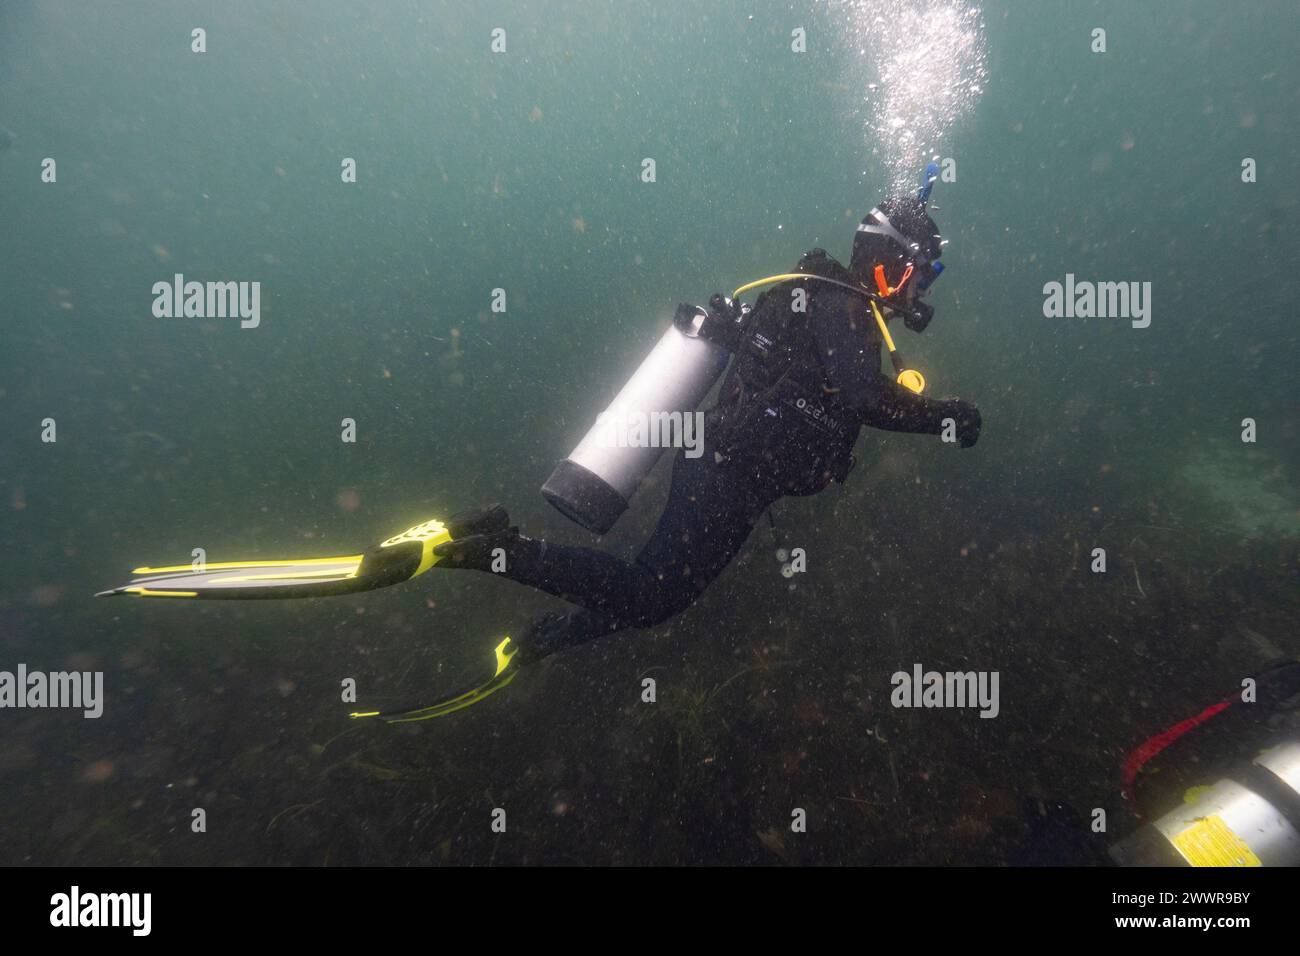 Underwater view of  a scuba diver in the ocean, Ogden Point, Vancouver Island, Victoria, British Columbia, Canada Stock Photo